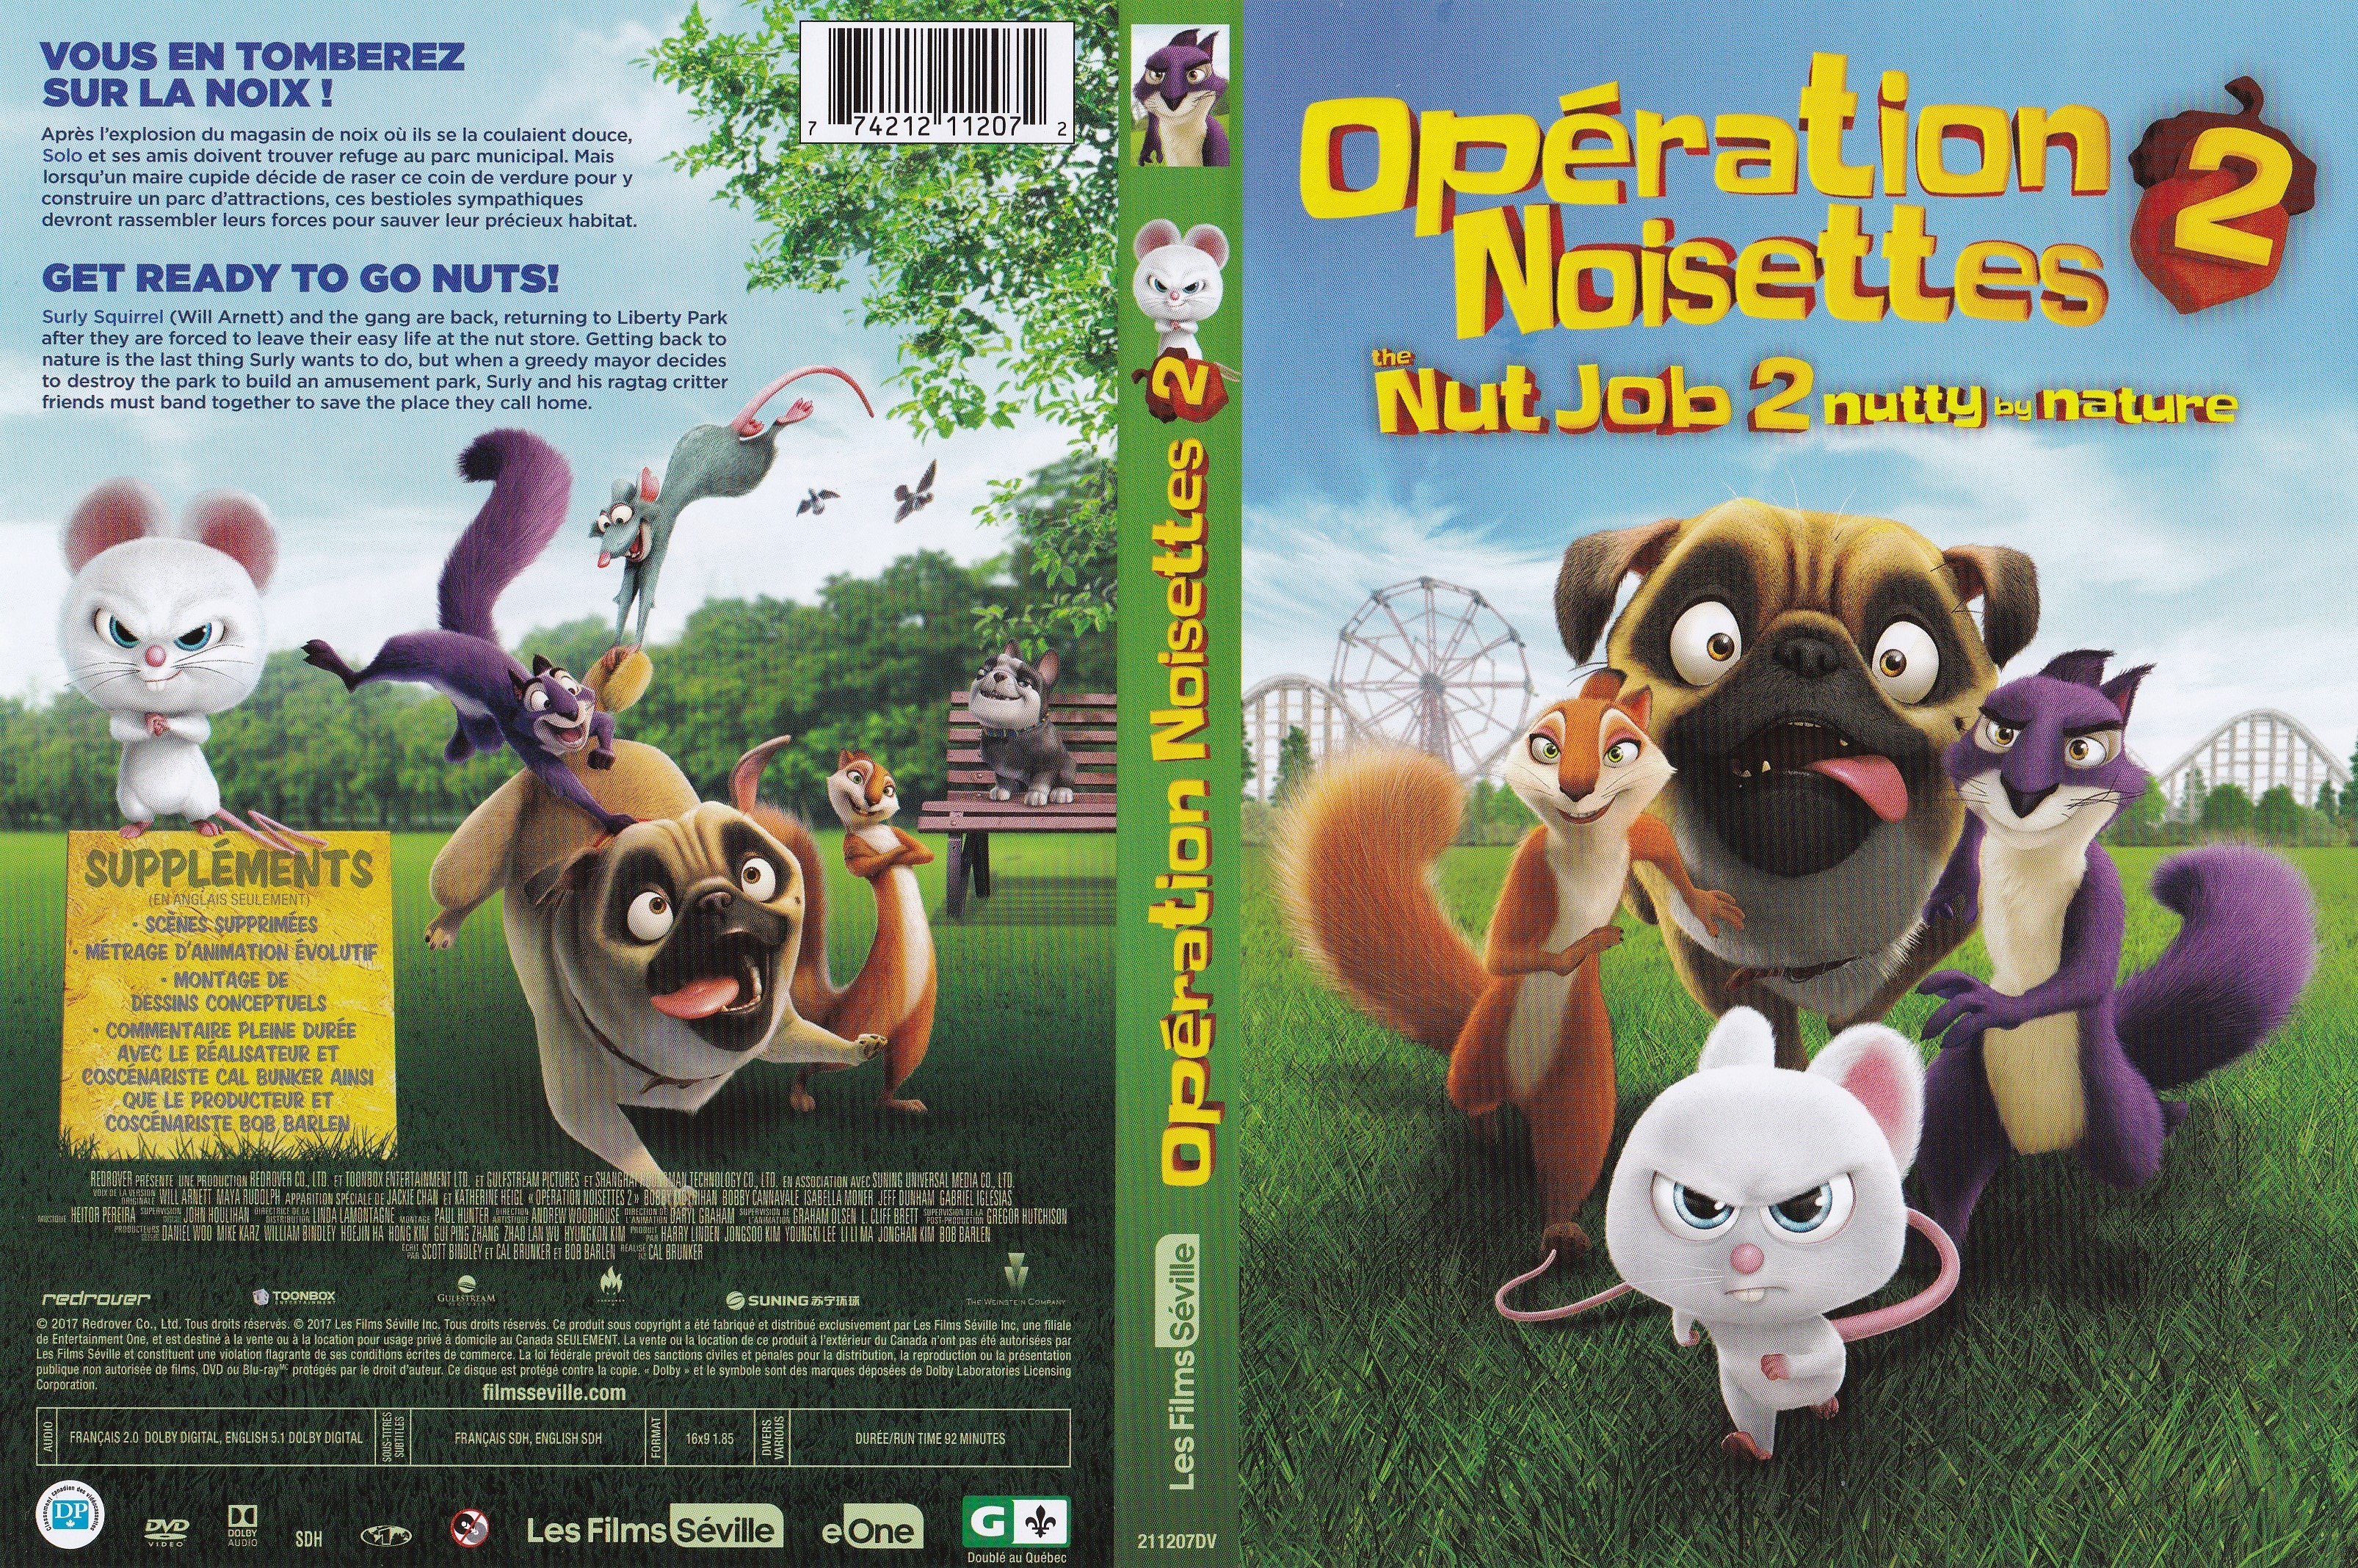 Jaquette DVD Operation Noisette 2 - The nuts job 2 (Canadienne)